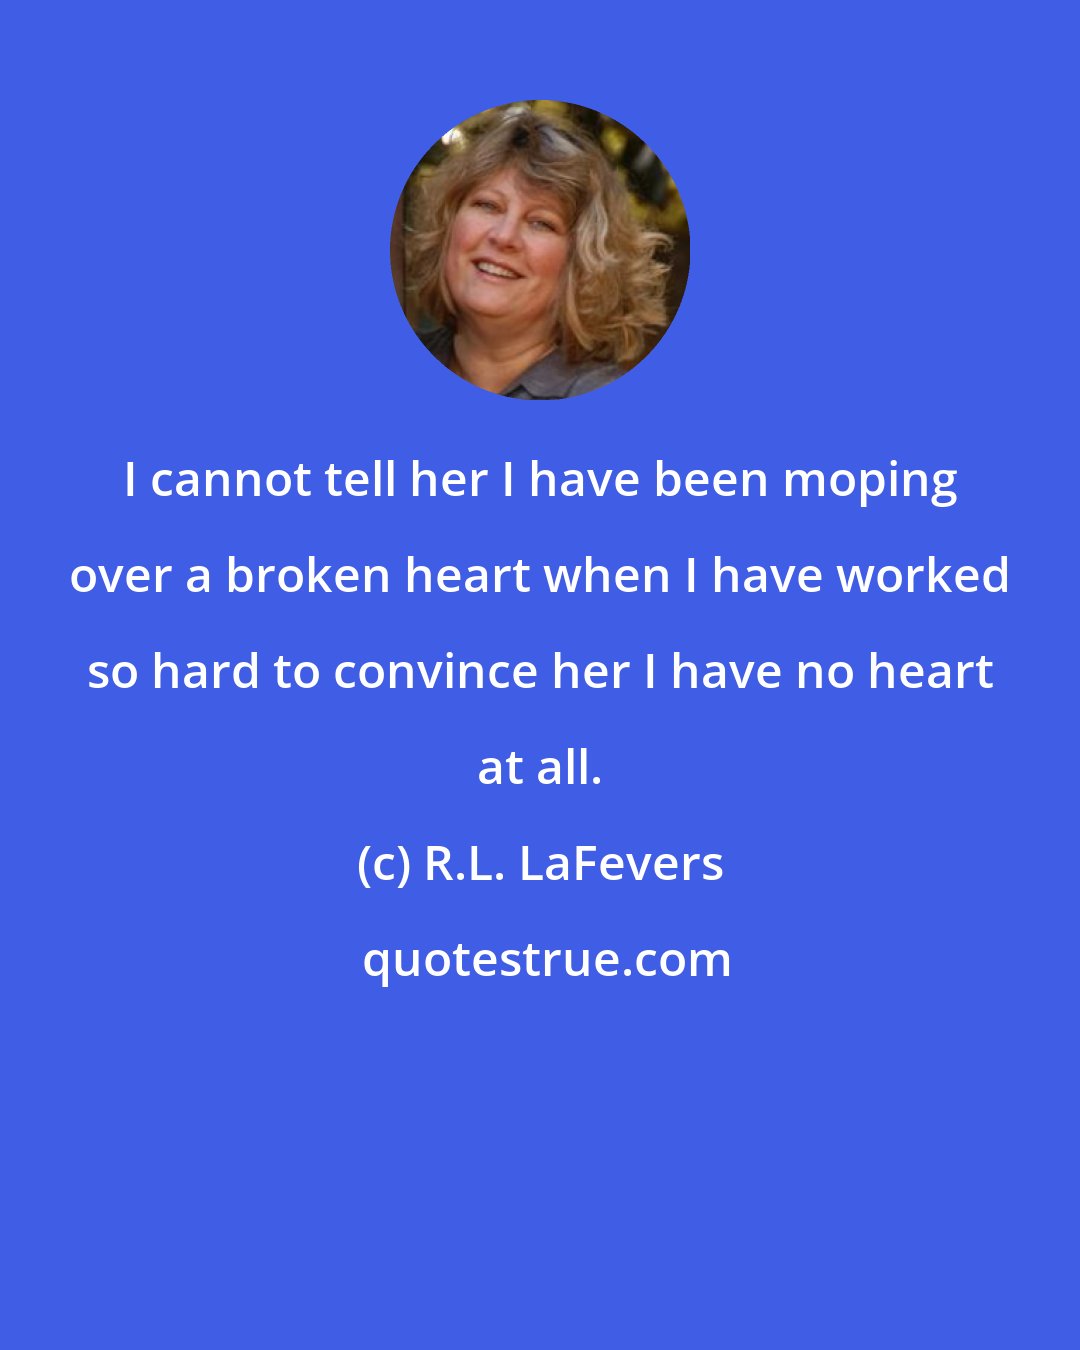 R.L. LaFevers: I cannot tell her I have been moping over a broken heart when I have worked so hard to convince her I have no heart at all.